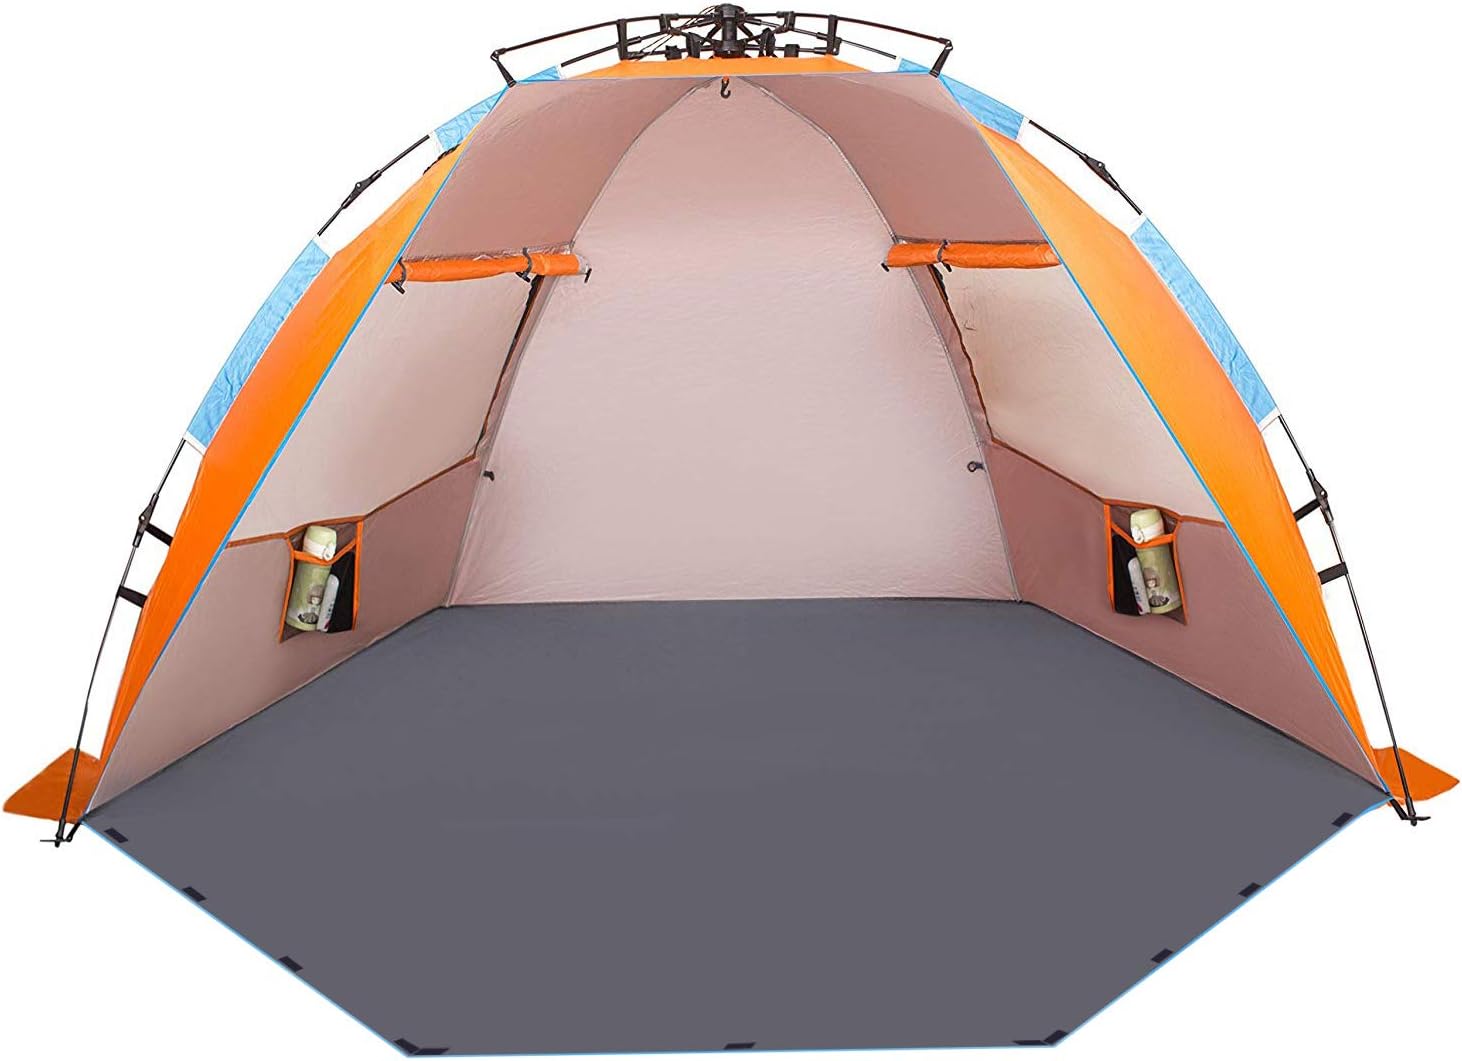 Oileus X-Large 4 Person Beach Tent Sun Shelter Review